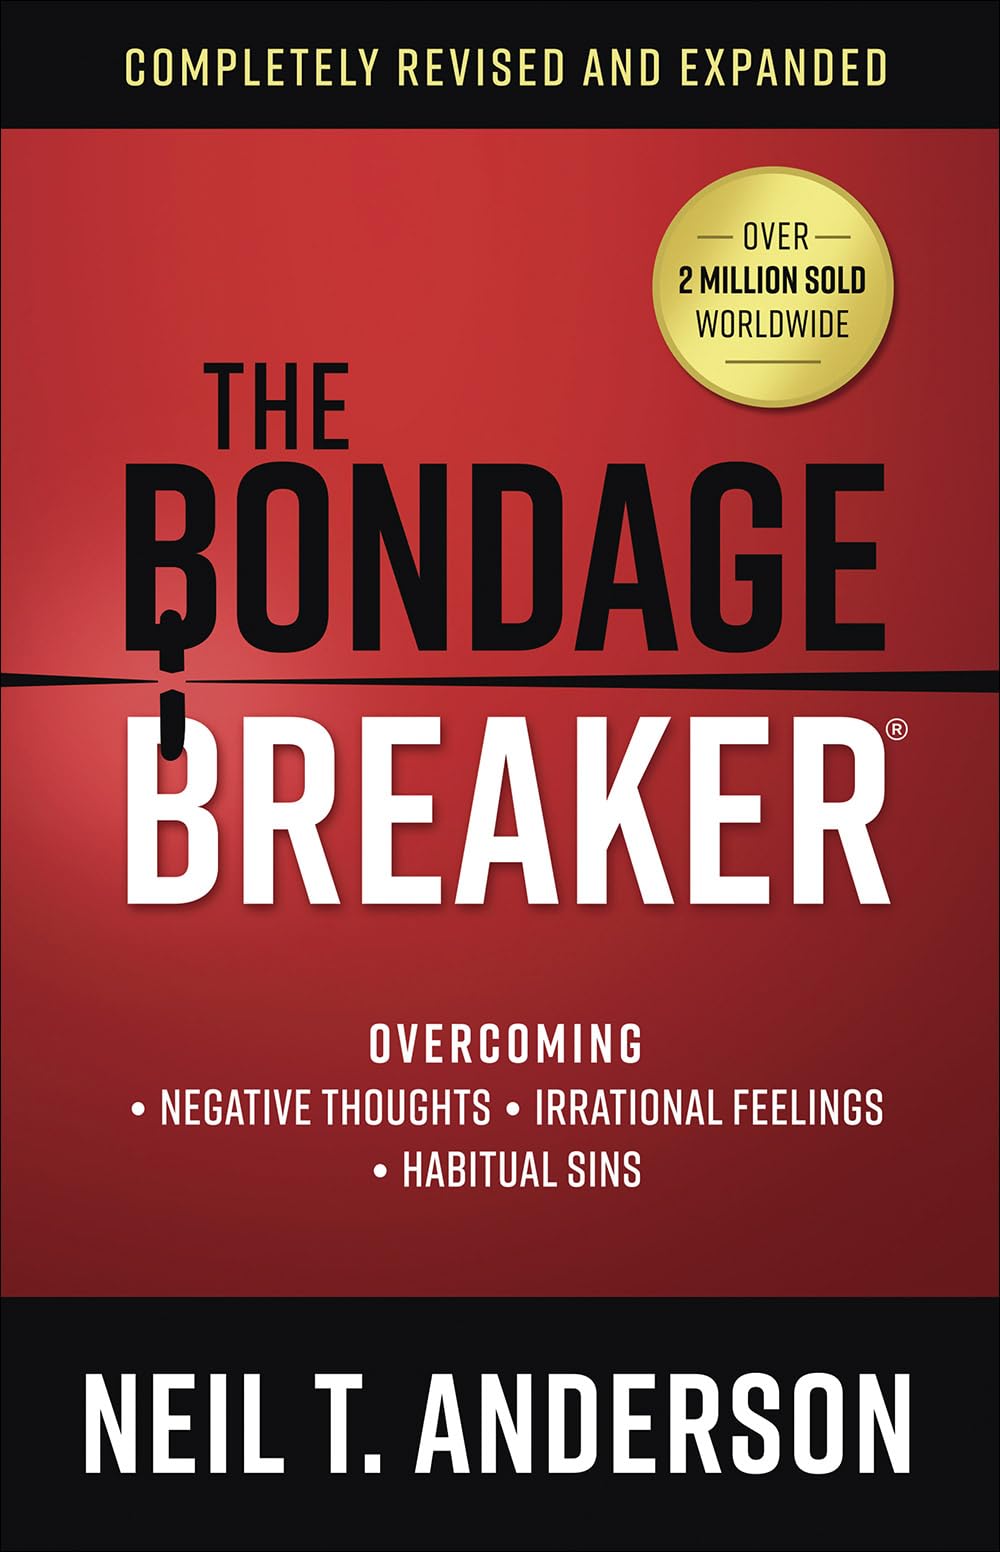 The Bondage Breaker: Overcoming *Negative Thoughts *Irrational Feelings *Habitual Sins by Anderson, Neil T.